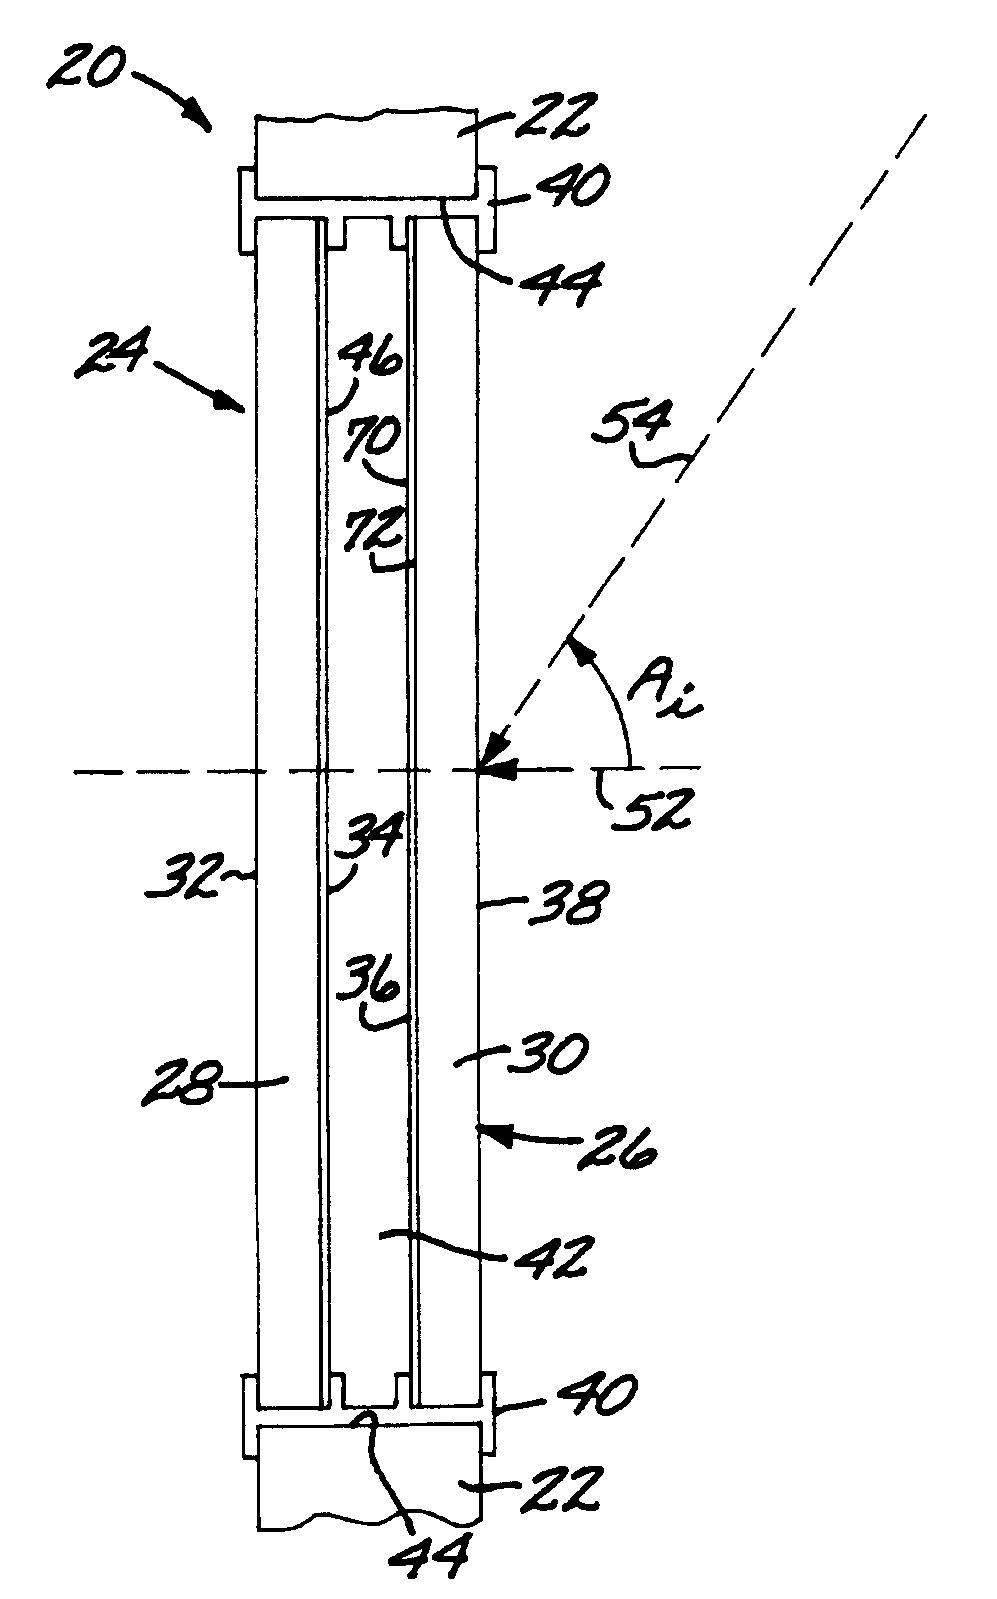 Building window having a visible-light-reflective optical interference coating thereon